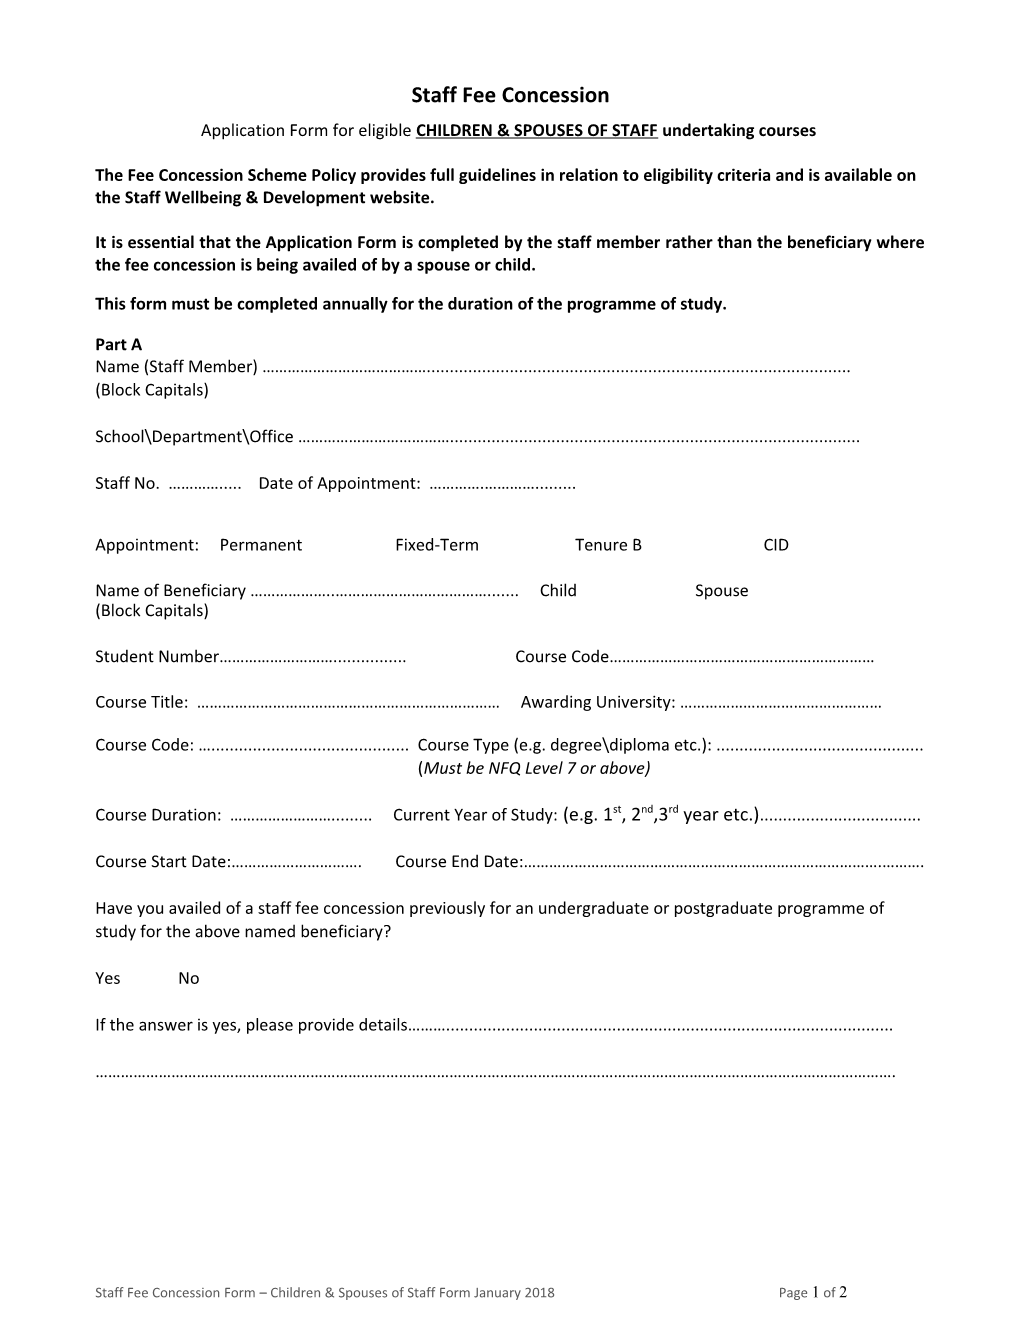 Application Form for Eligible CHILDREN & SPOUSES of STAFF Undertaking Courses